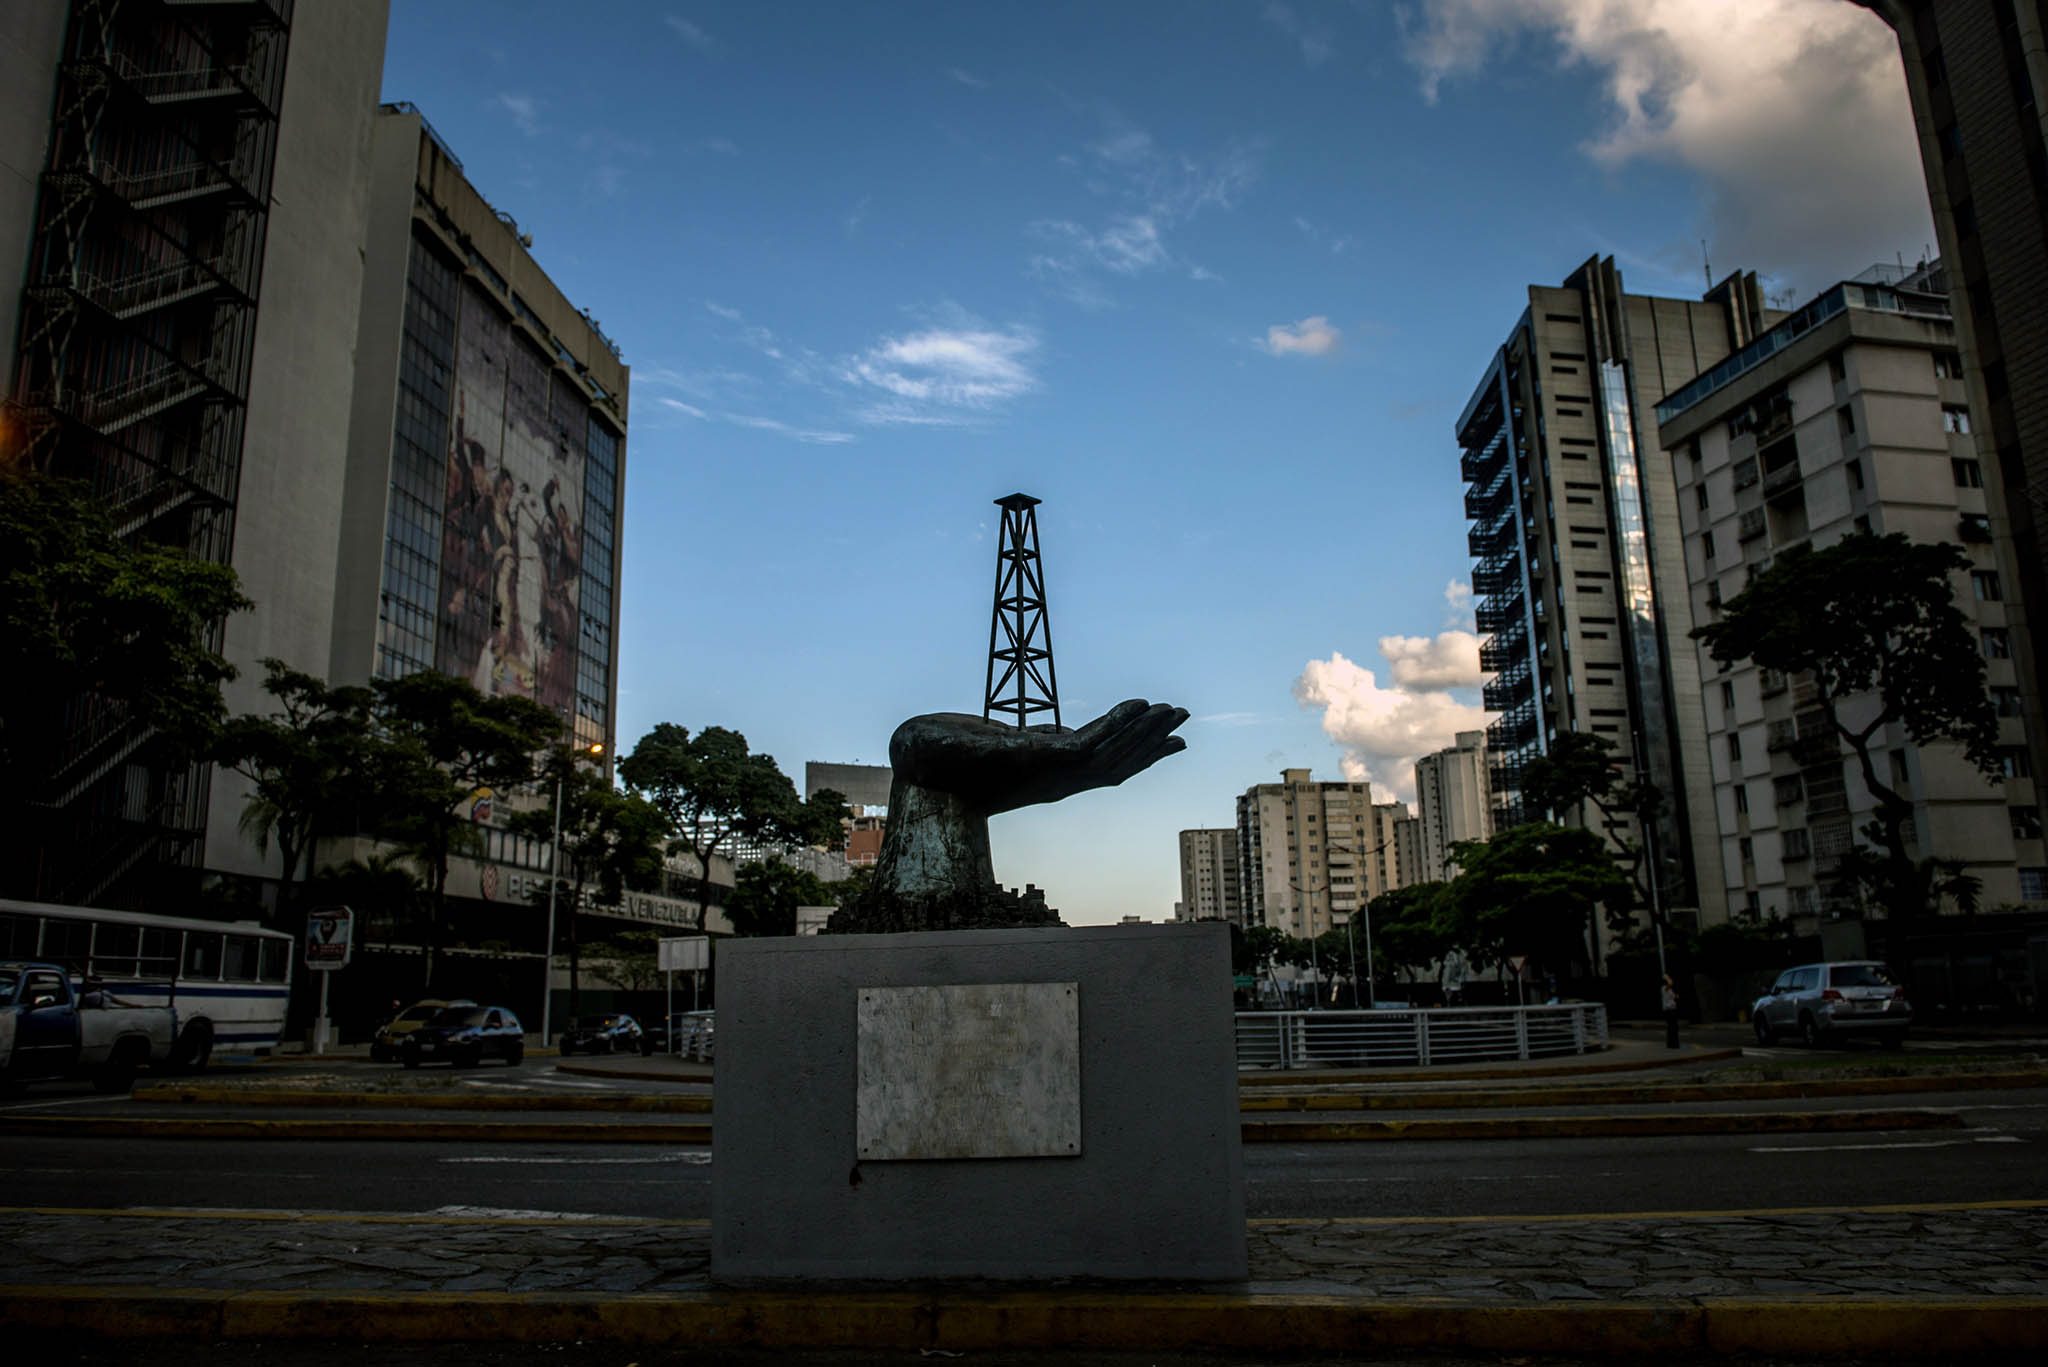 The headquarters of PDVSA, Venezuela’s state-owned oil company, in Caracas. February 6, 2019. (Meridith Kohut/The New York Times)